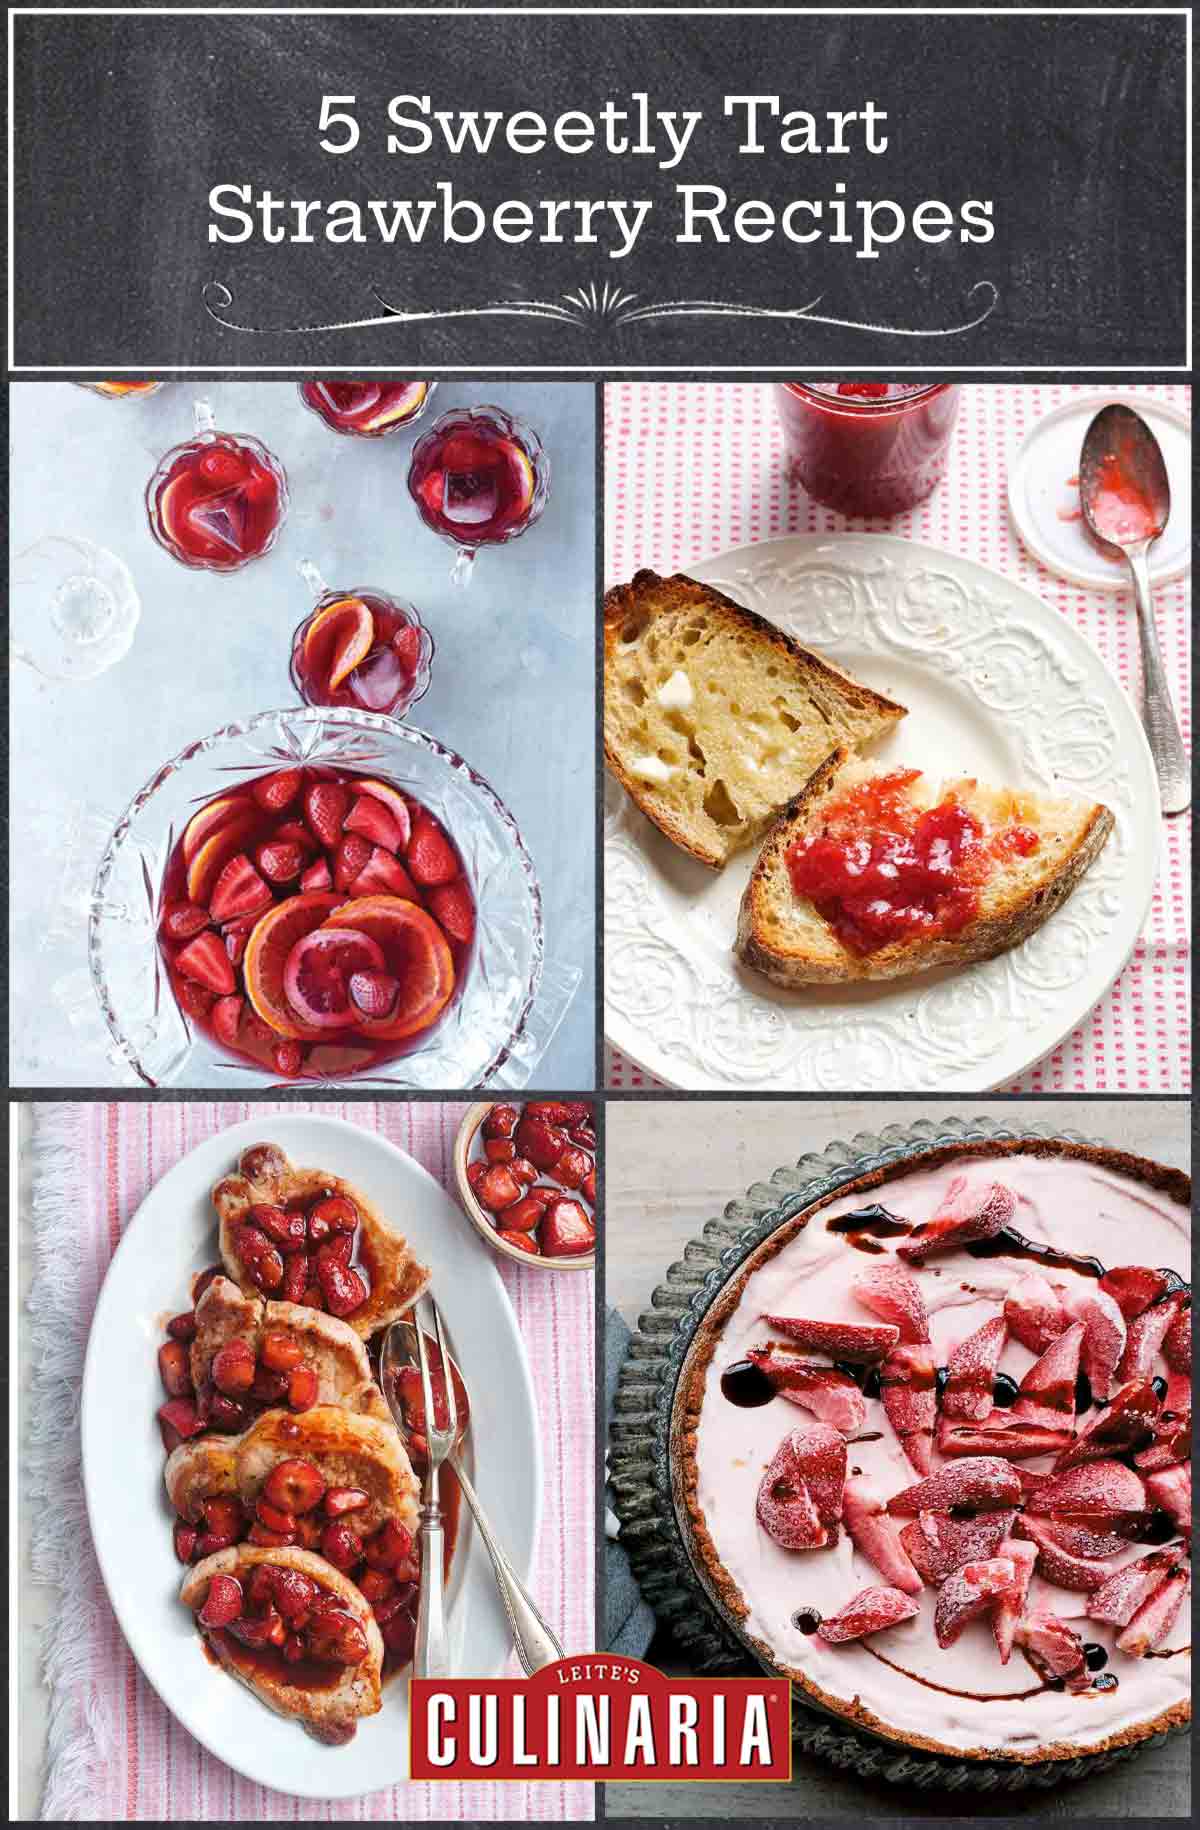 A grid of images of strawberry sangria, strawberry jam on toast, pork chops with strawberry sauce, and strawberry ice cream pie.